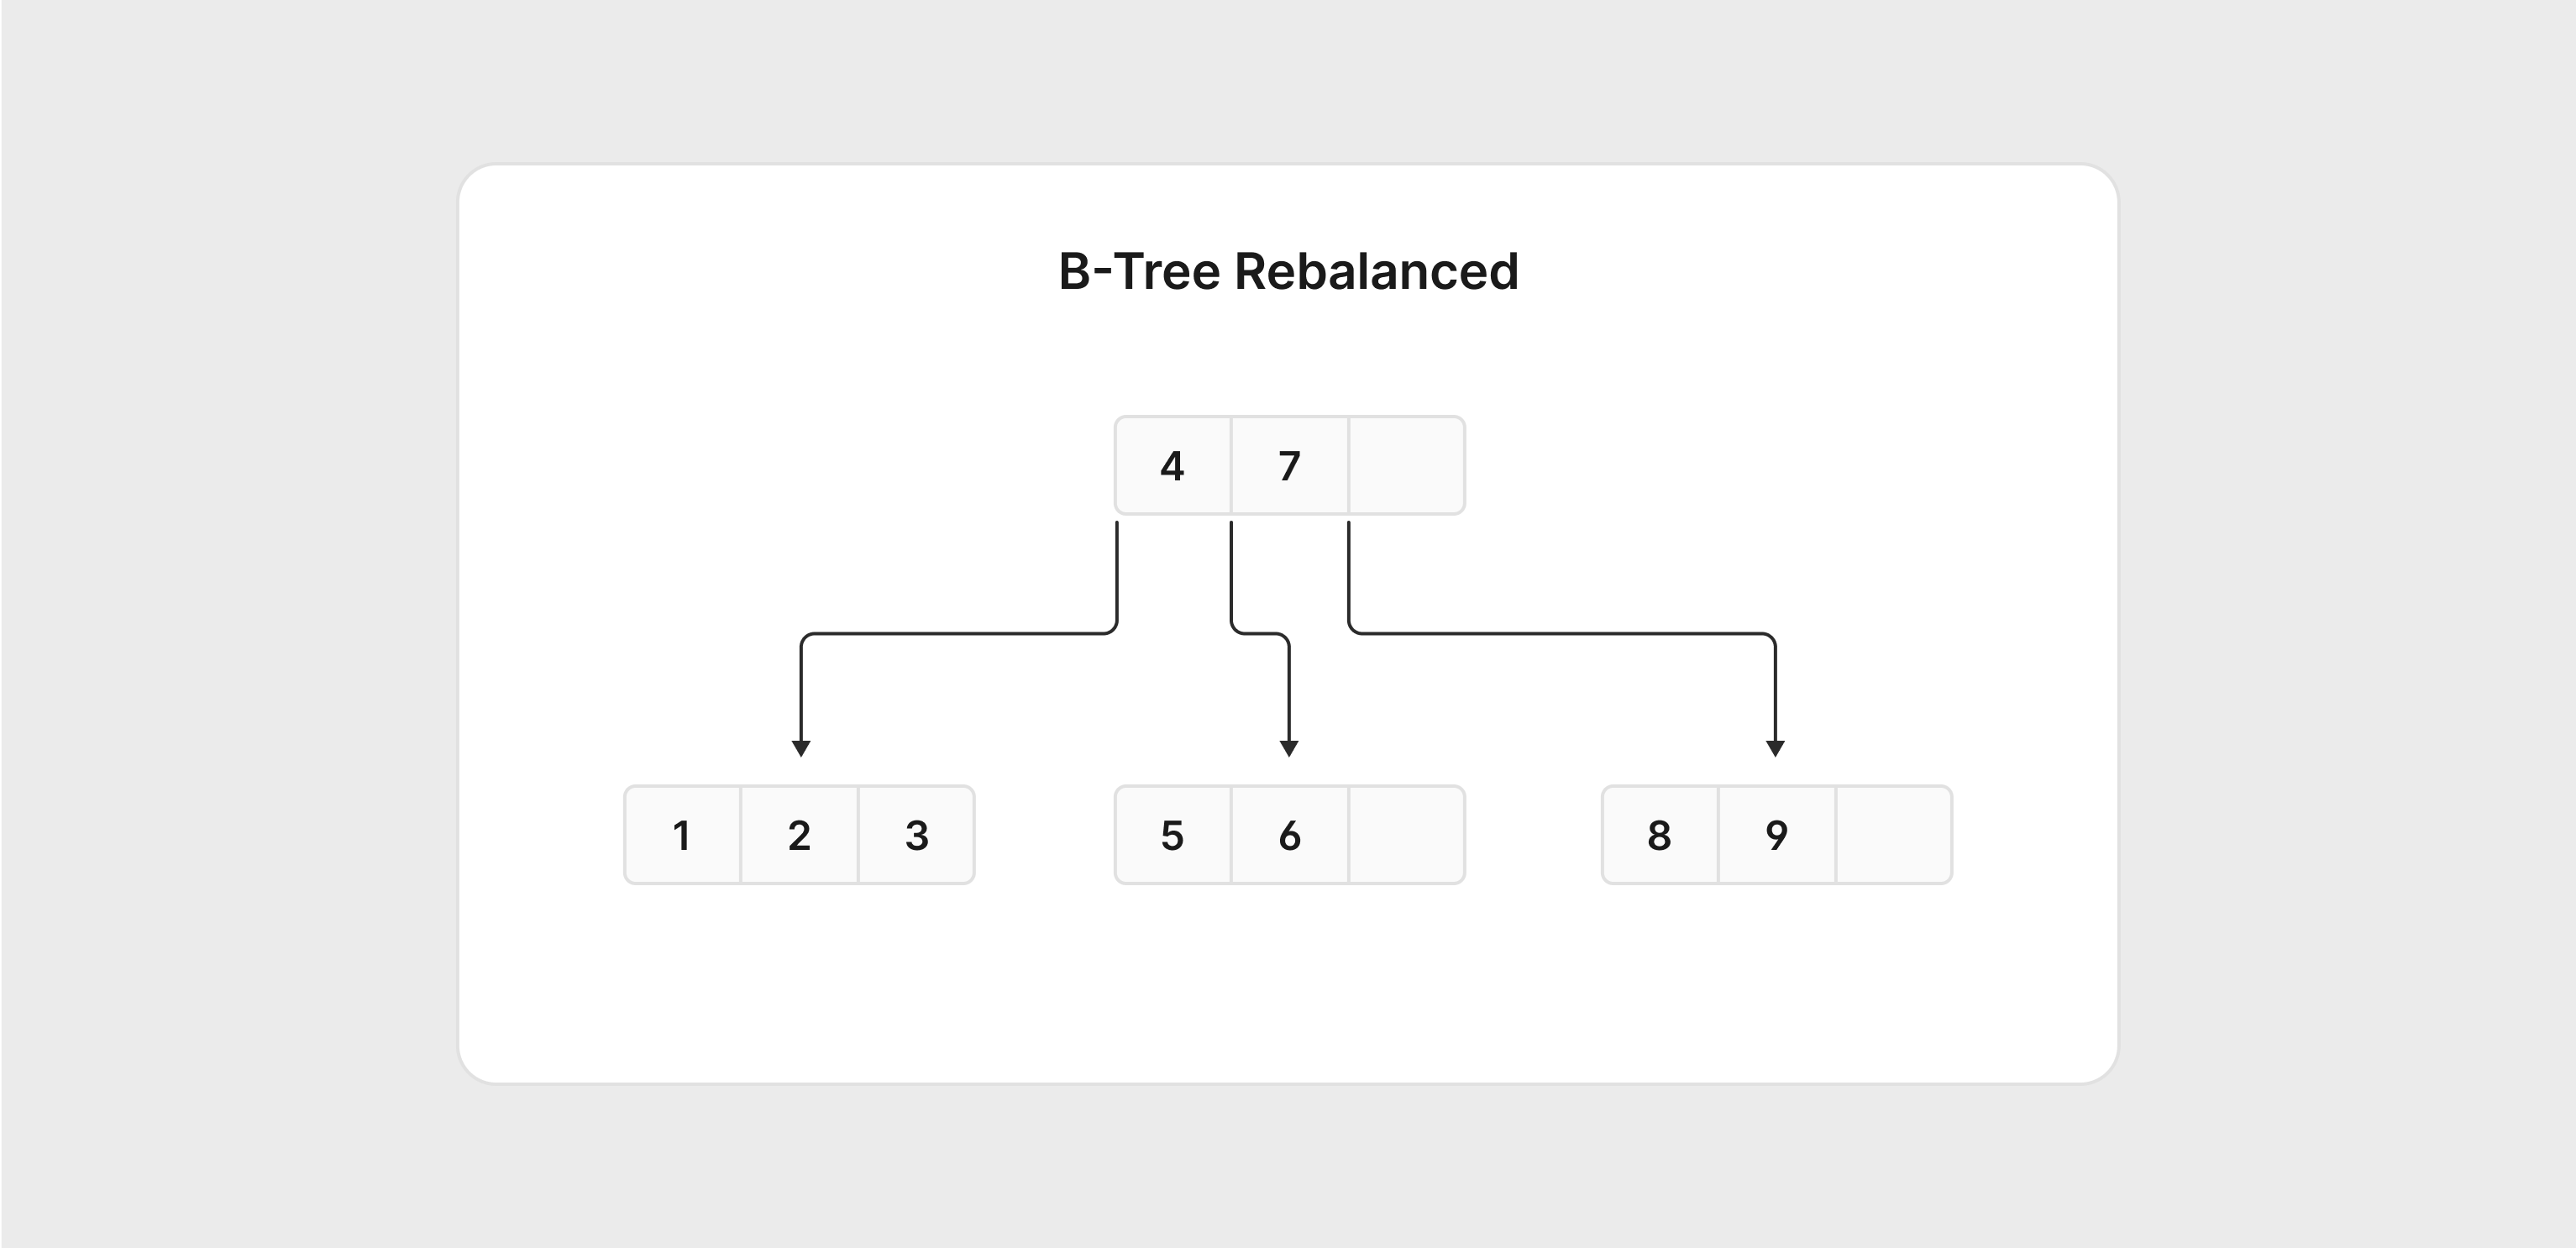 The B-Tree diagram with 7-9 added